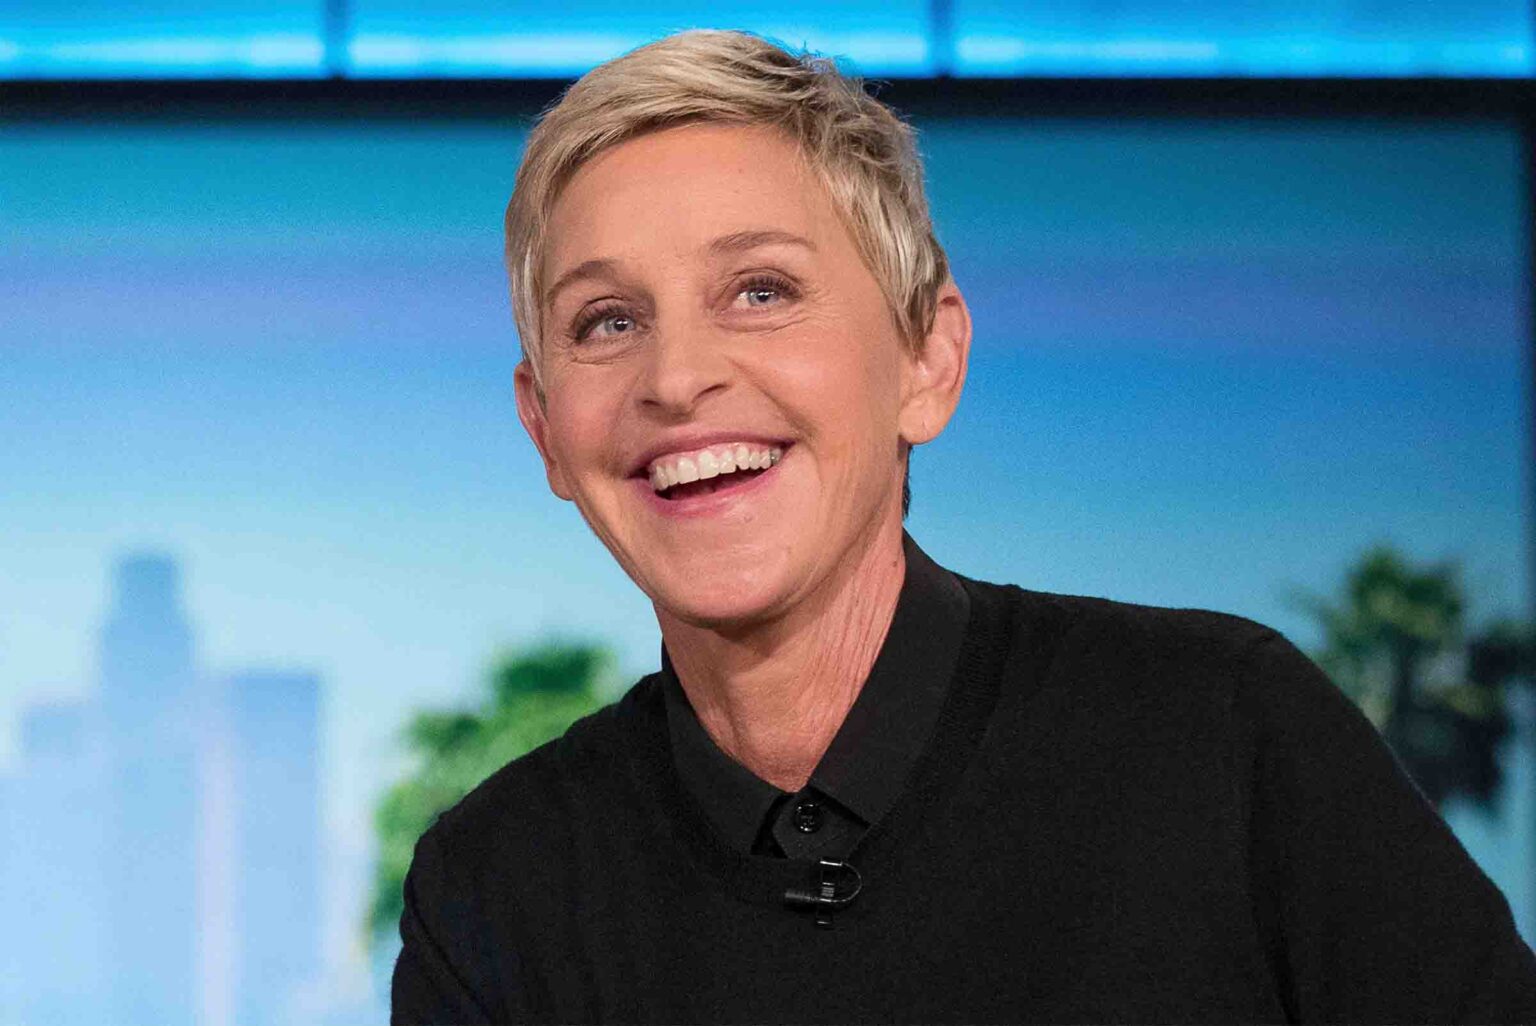 While Ellen DeGeneres may or may not be nice, she's done some kind things with her massive net worth on her daytime TV show.